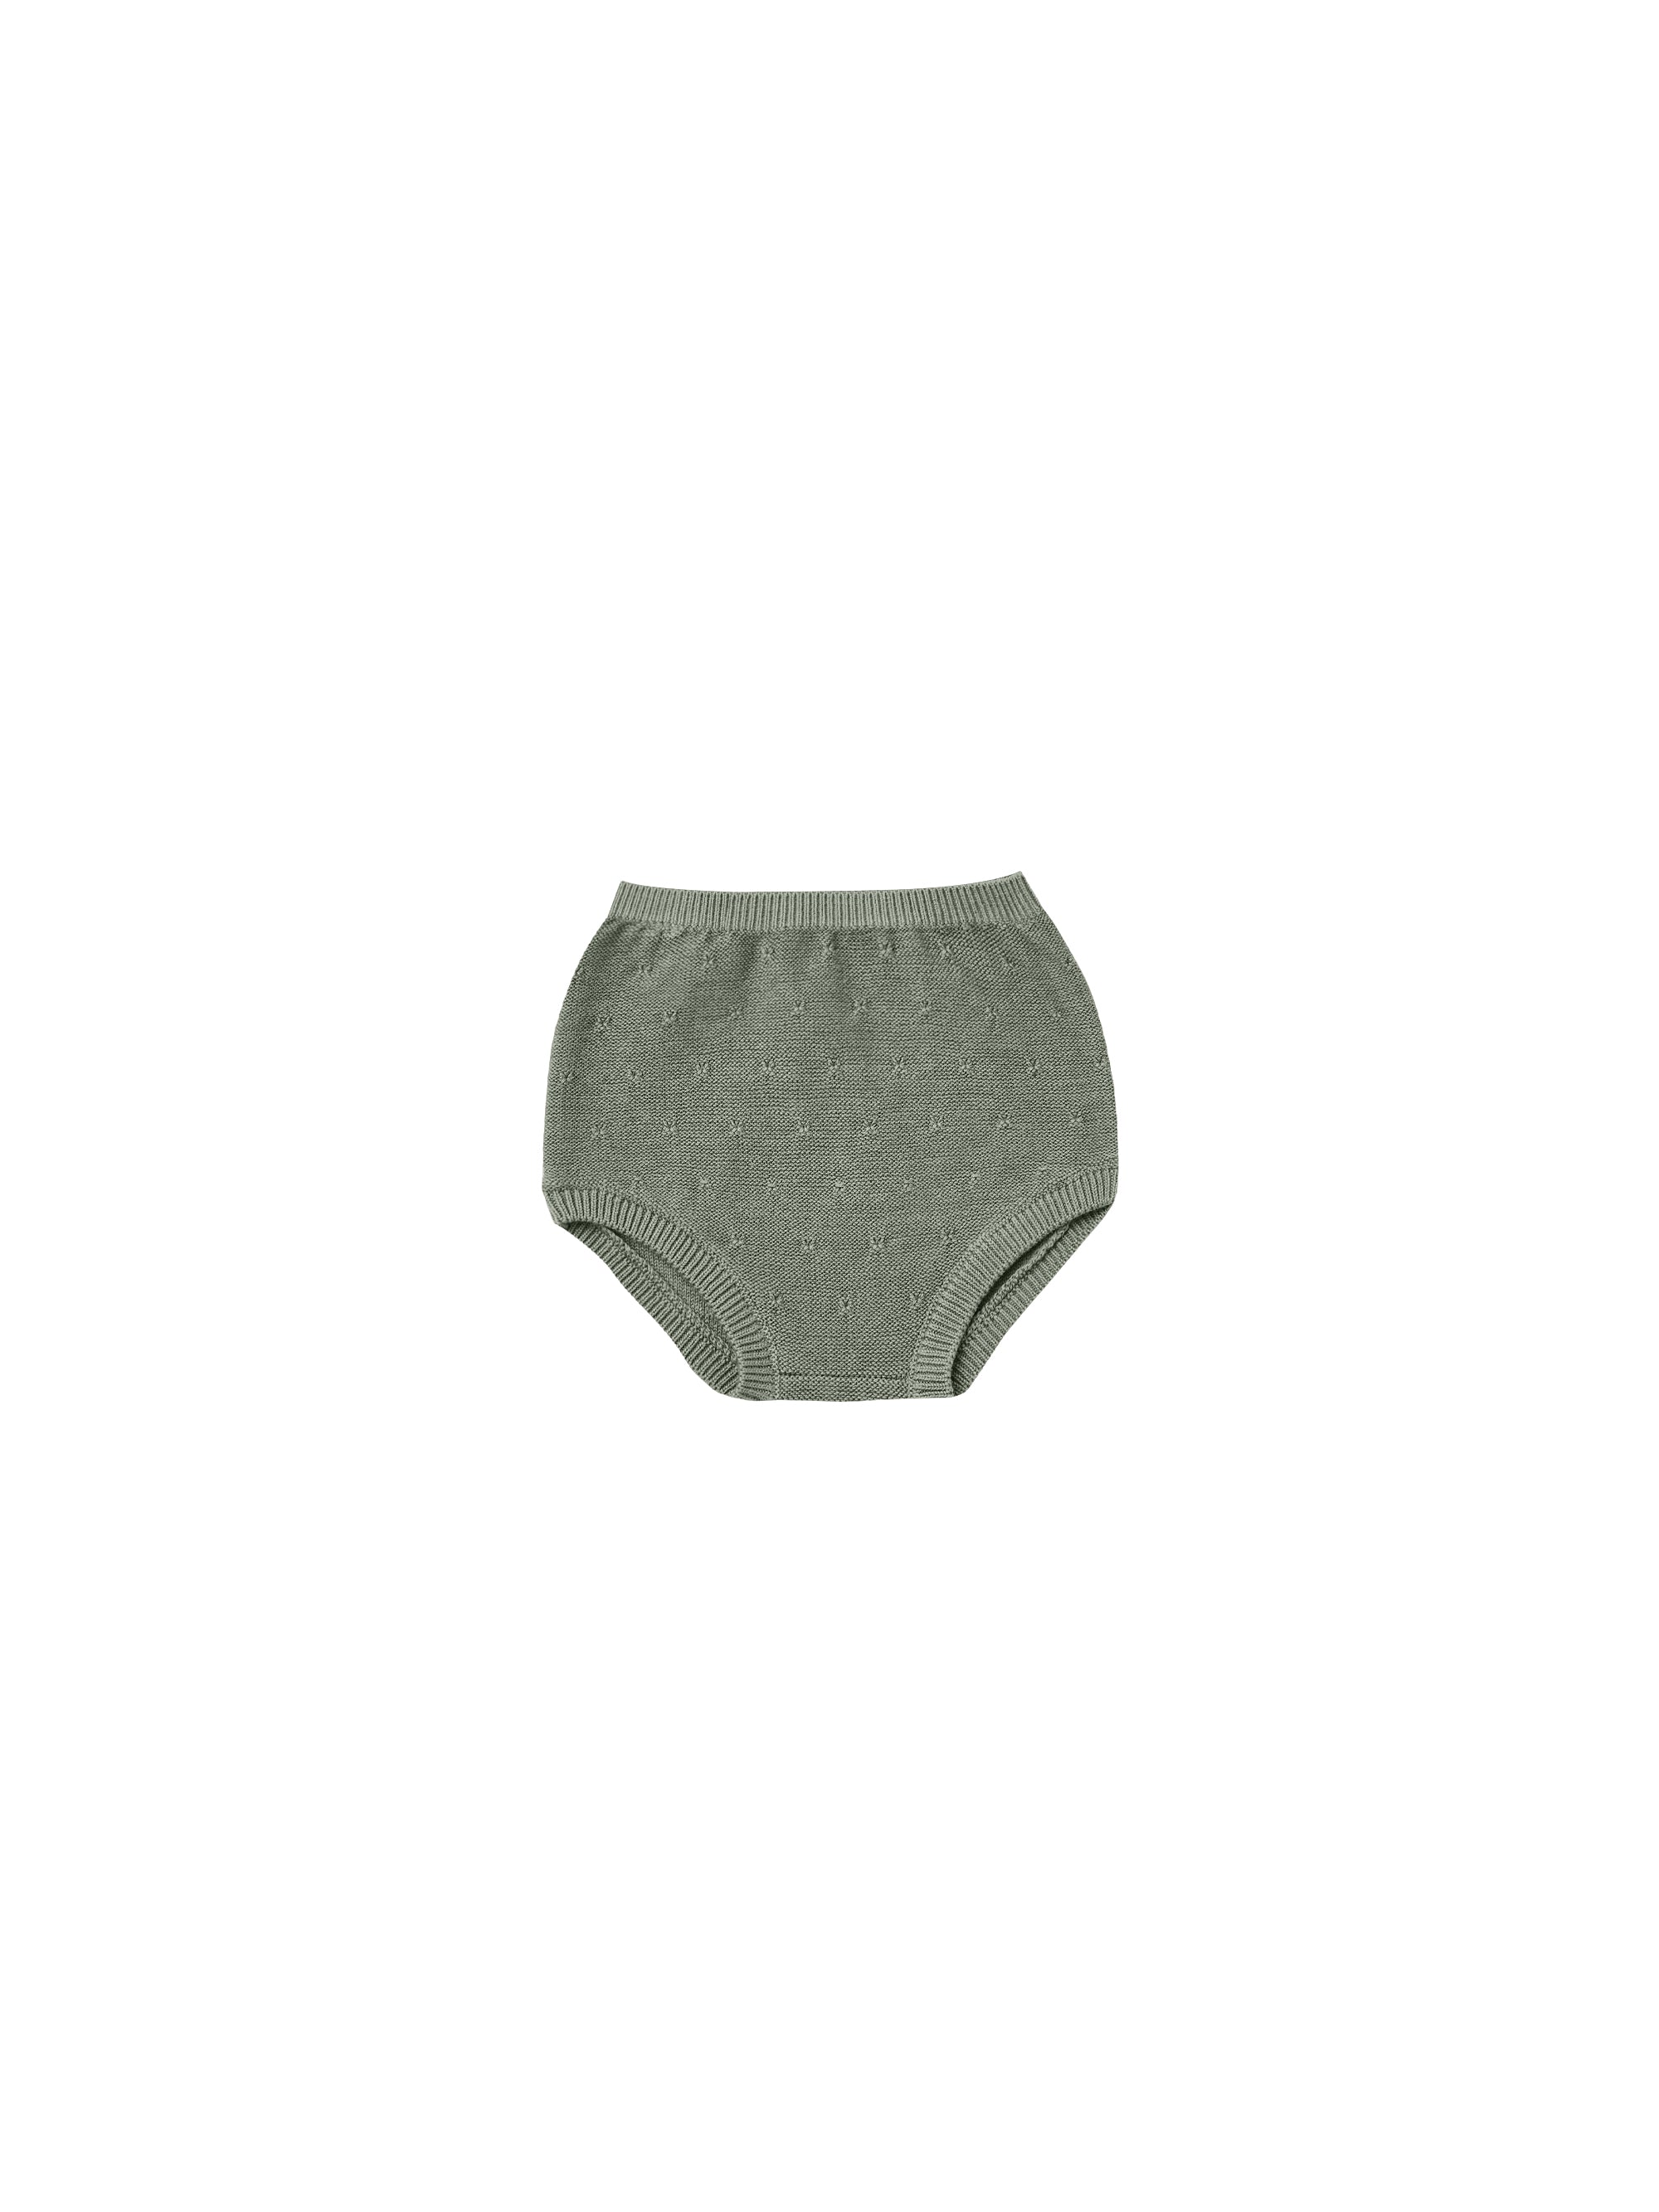 Quincy Mae Knit Bloomers - Basil